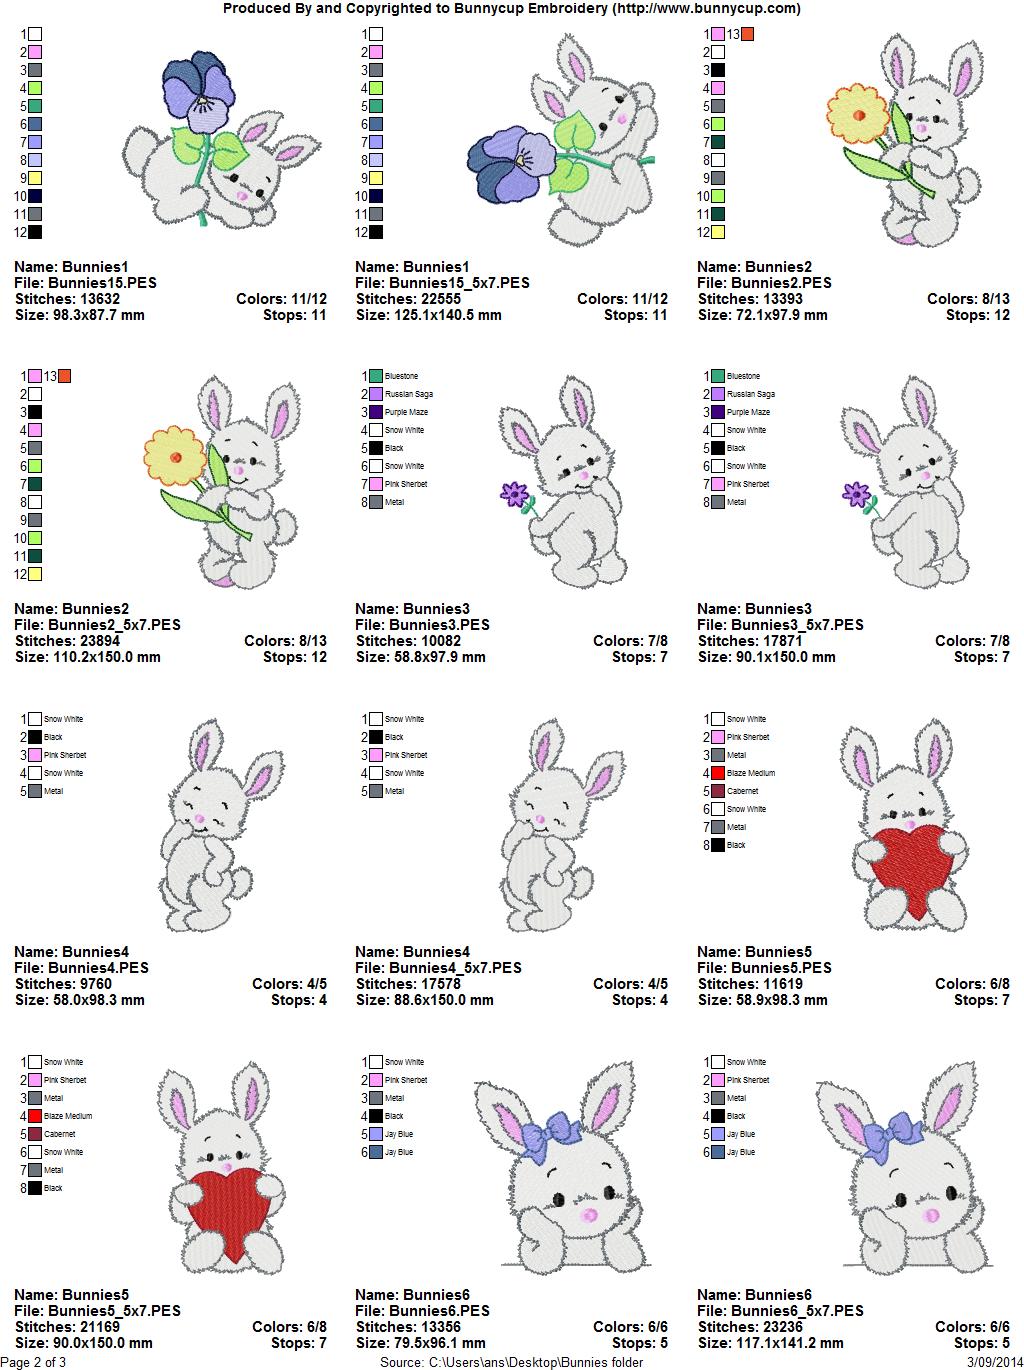 Bunnies Embroidery Designs - Bunnycup Embroidery